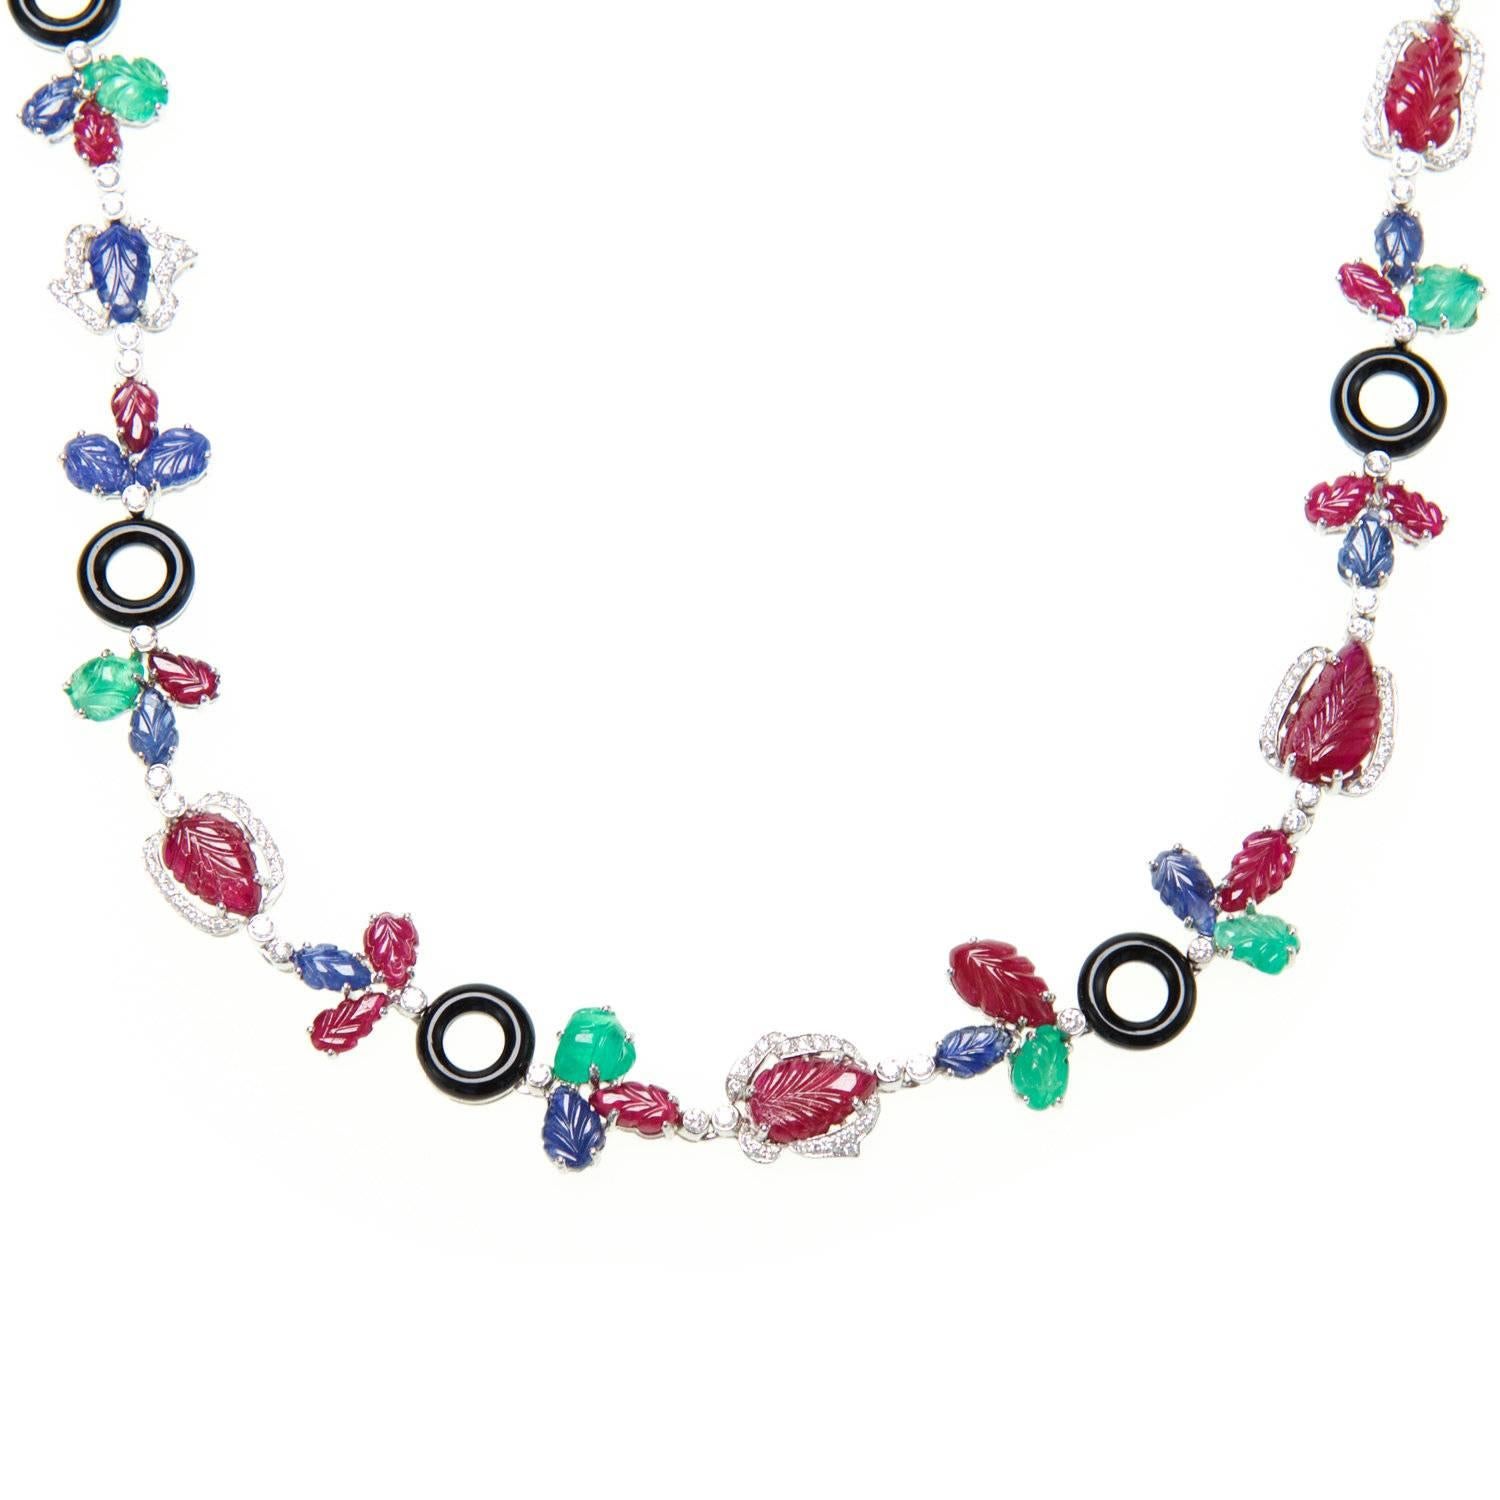 Multi Gem Necklace With Diamonds, Rubies, Sapphires, Emeralds, and Onyx